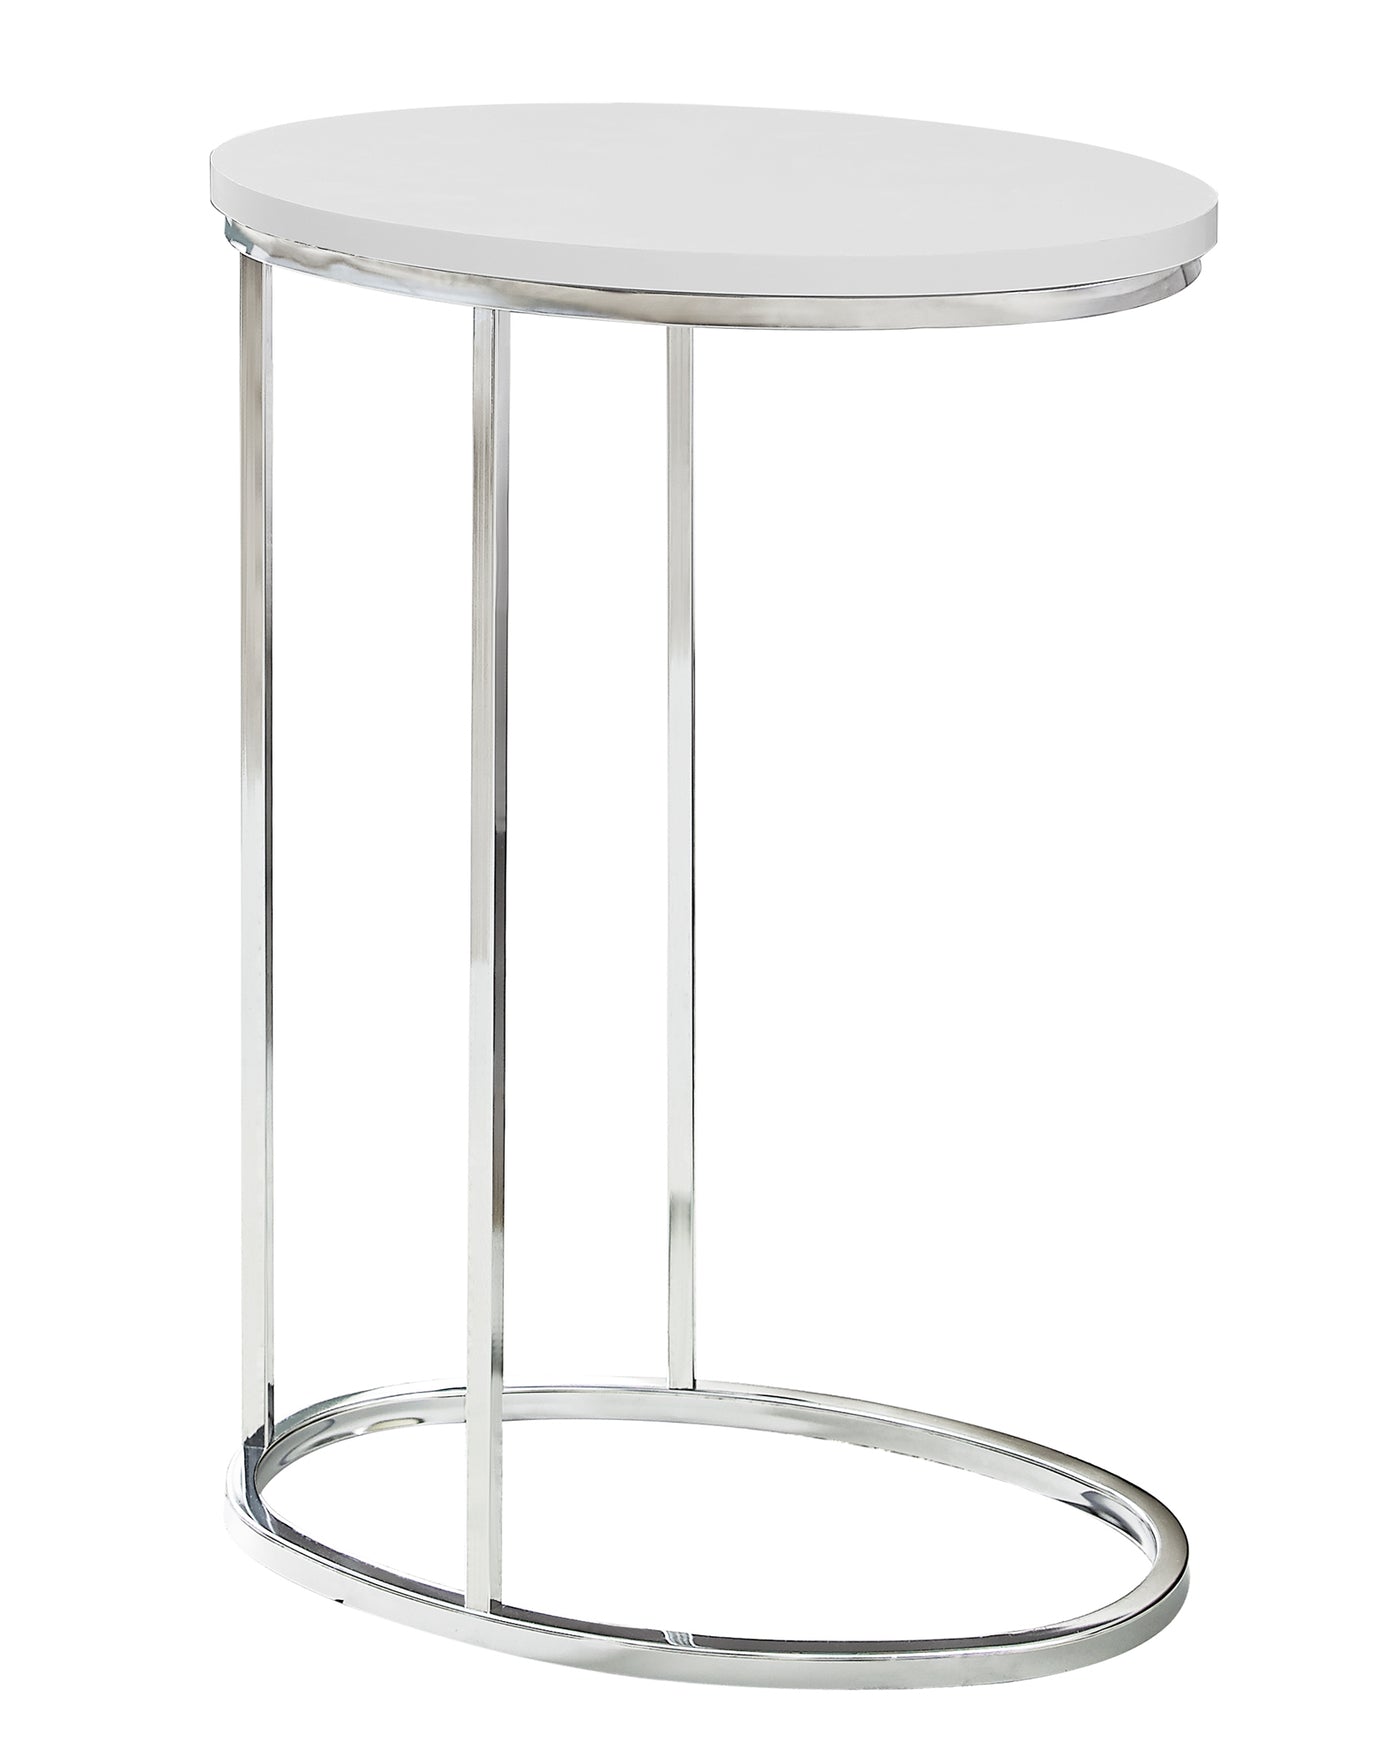 18.5" X 12" X 25" White Particle Board Metal Accent Table